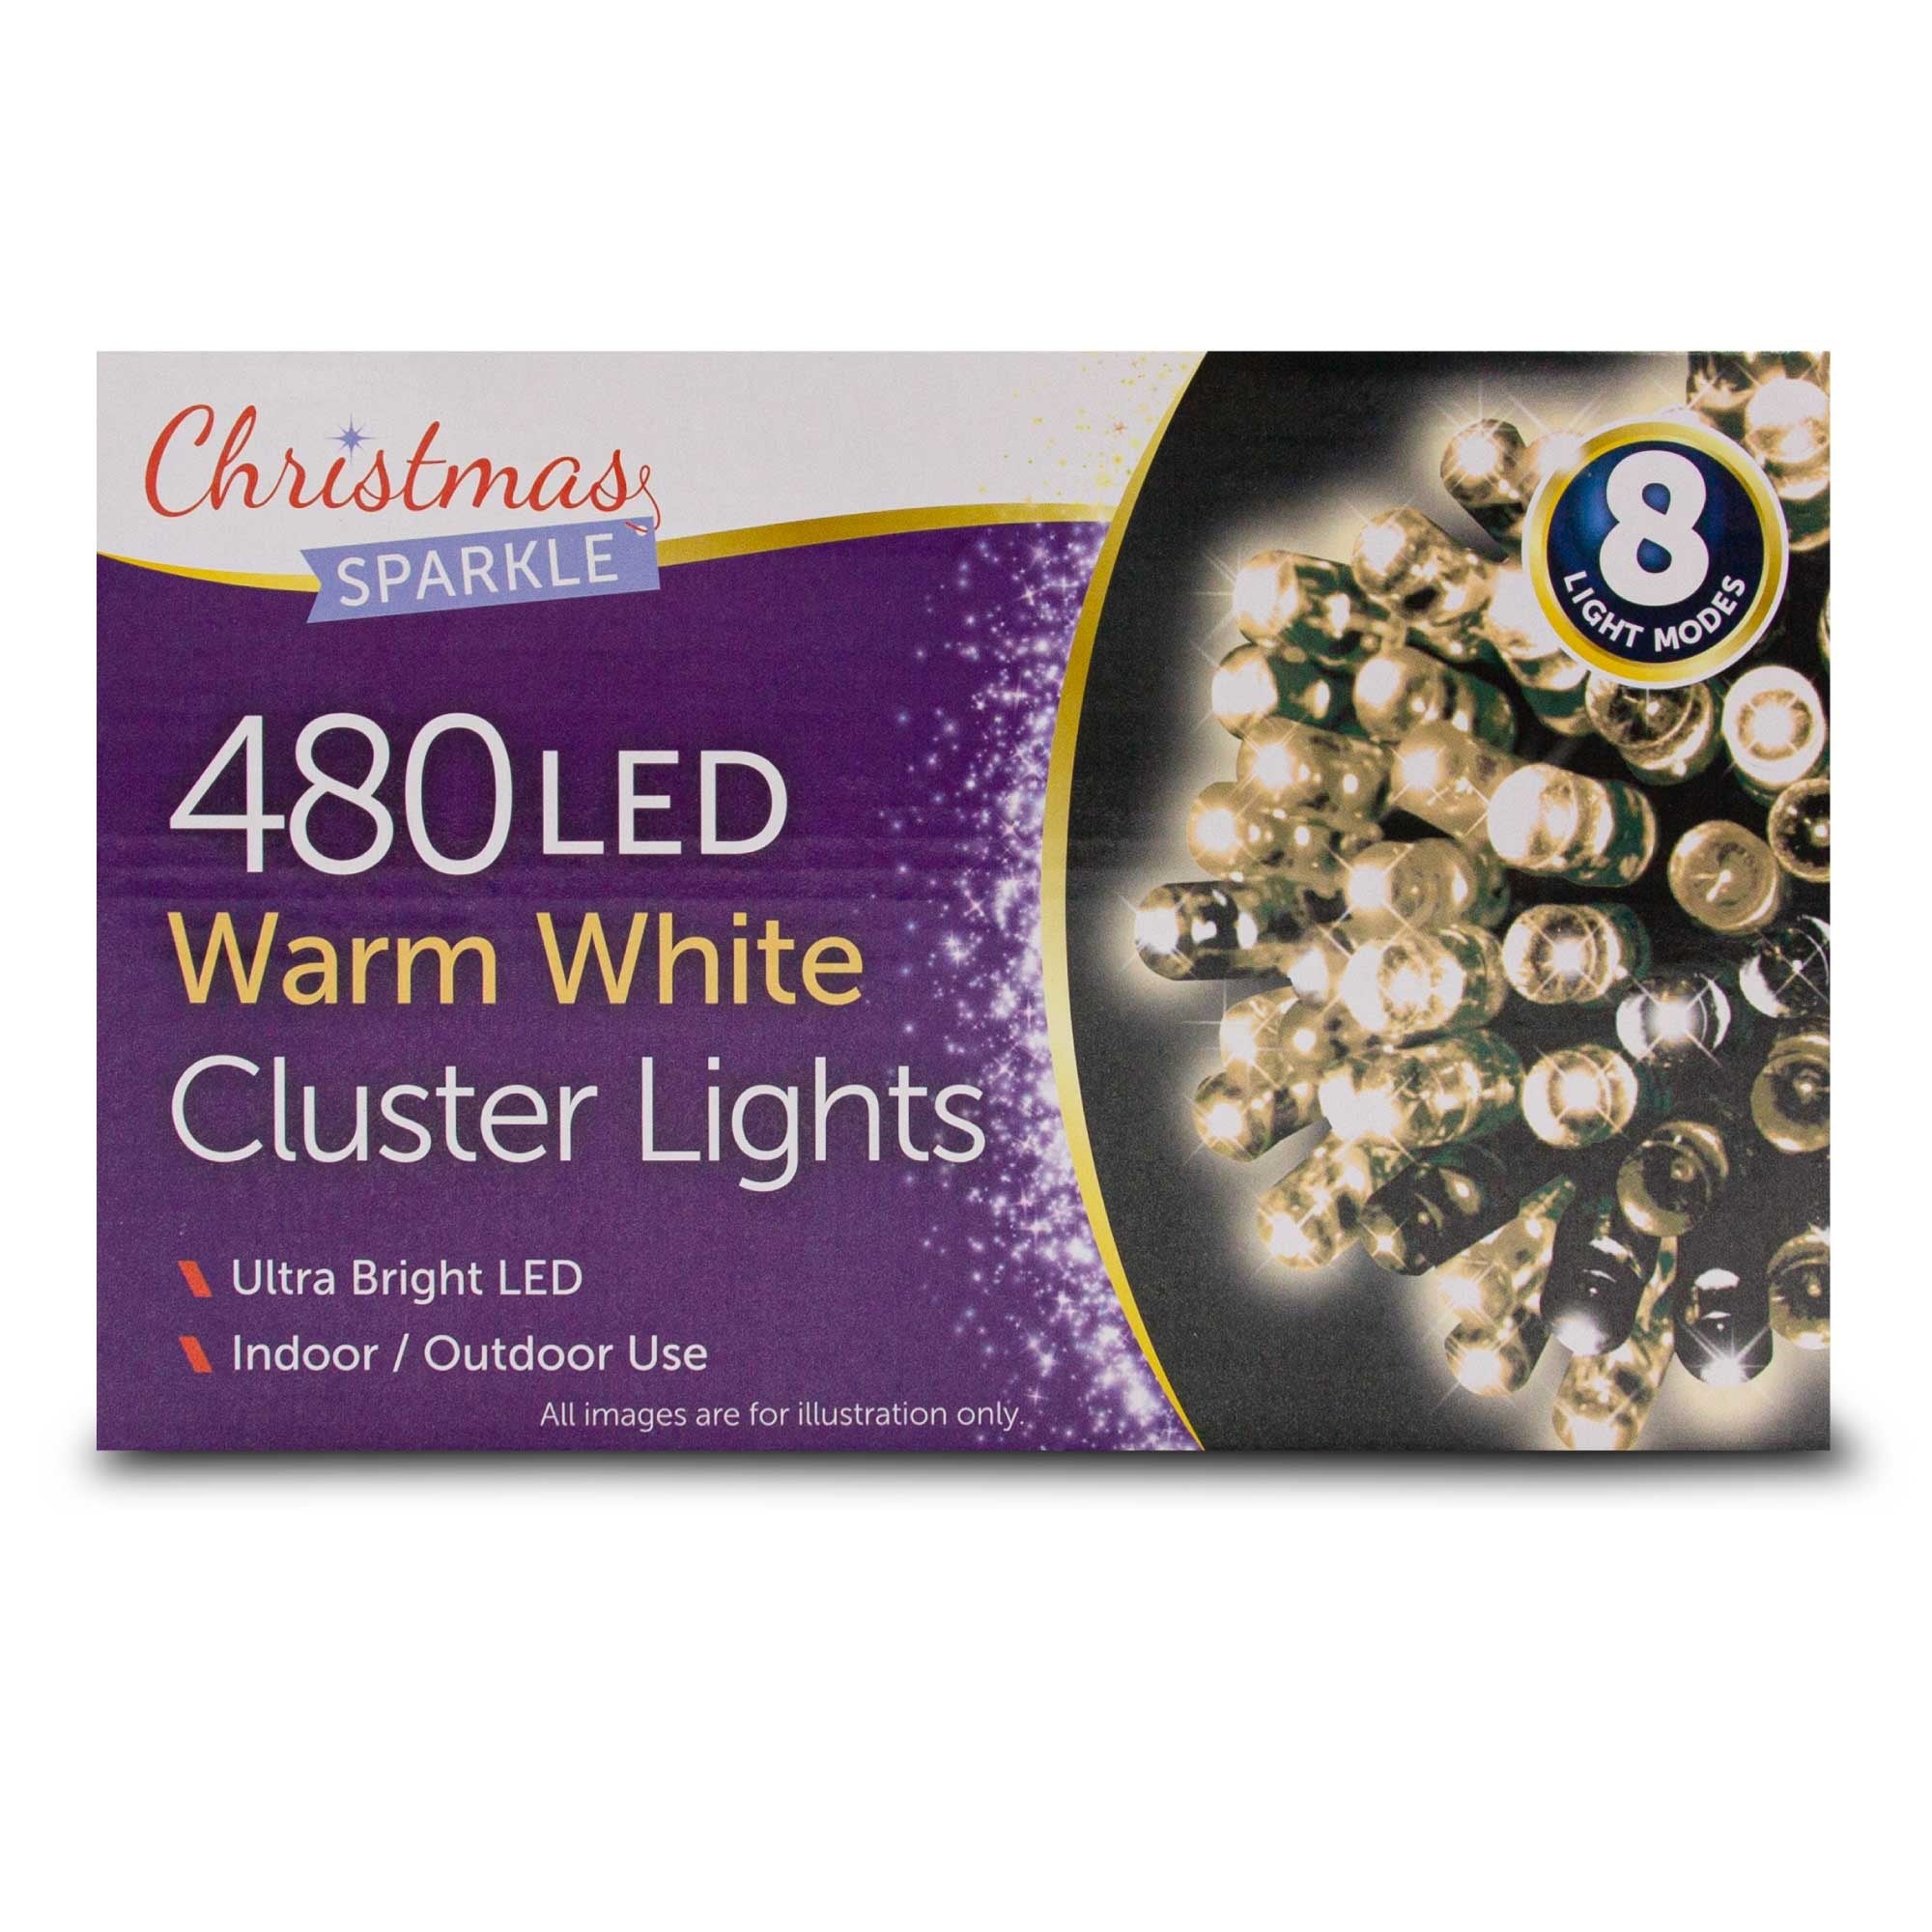 Christmas Sparkle Indoor and Outdoor Cluster Lights x 480 with Warm White LEDs - Mains Operated  | TJ Hughes